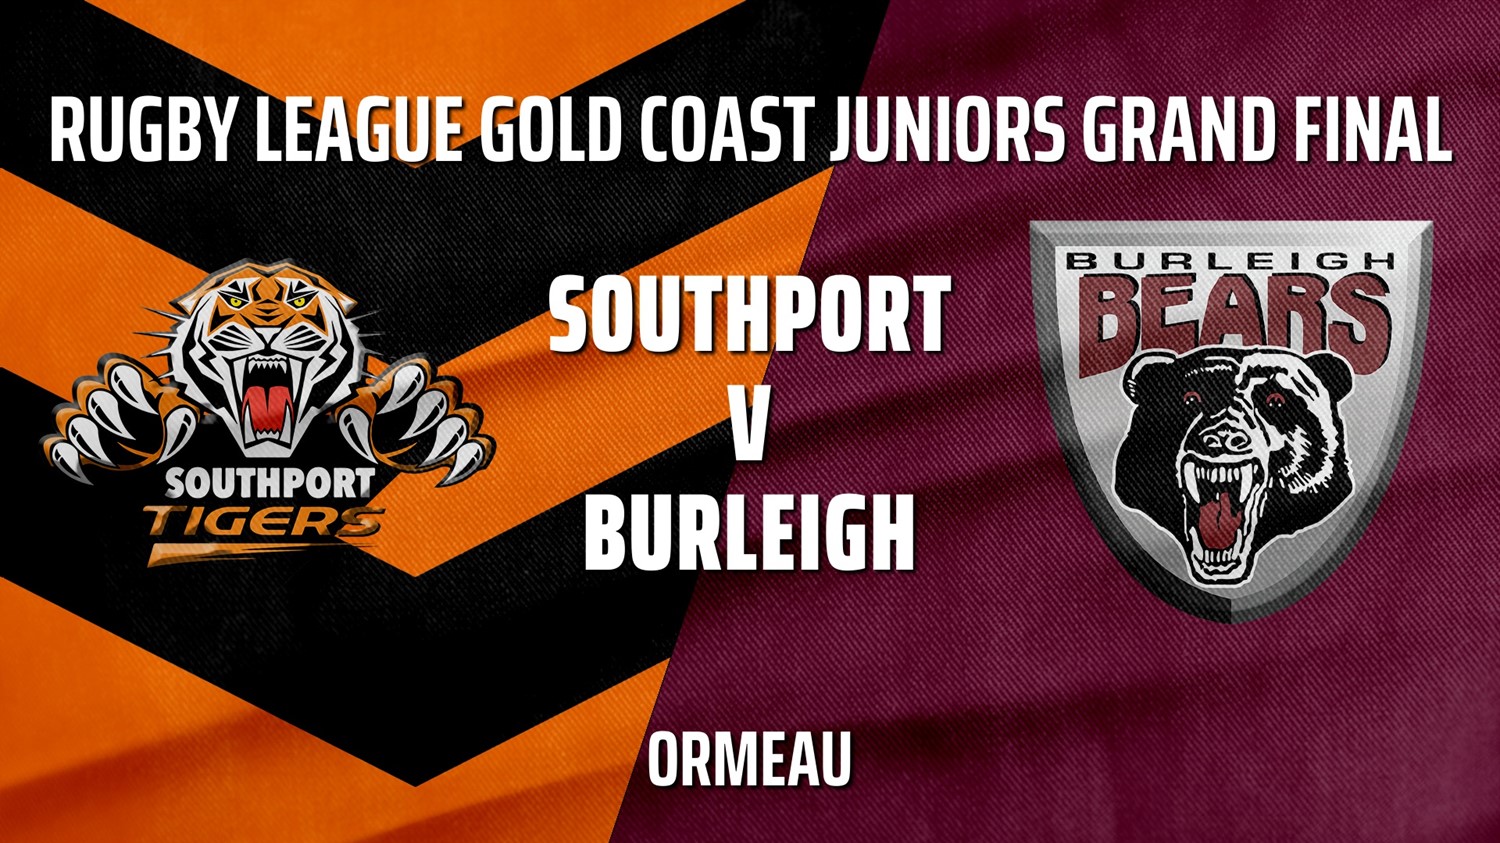 210925-Rugby League Gold Coast Juniors U13 Division 1 Grand Final - Southport Tigers v Burleigh Bears Juniors Slate Image